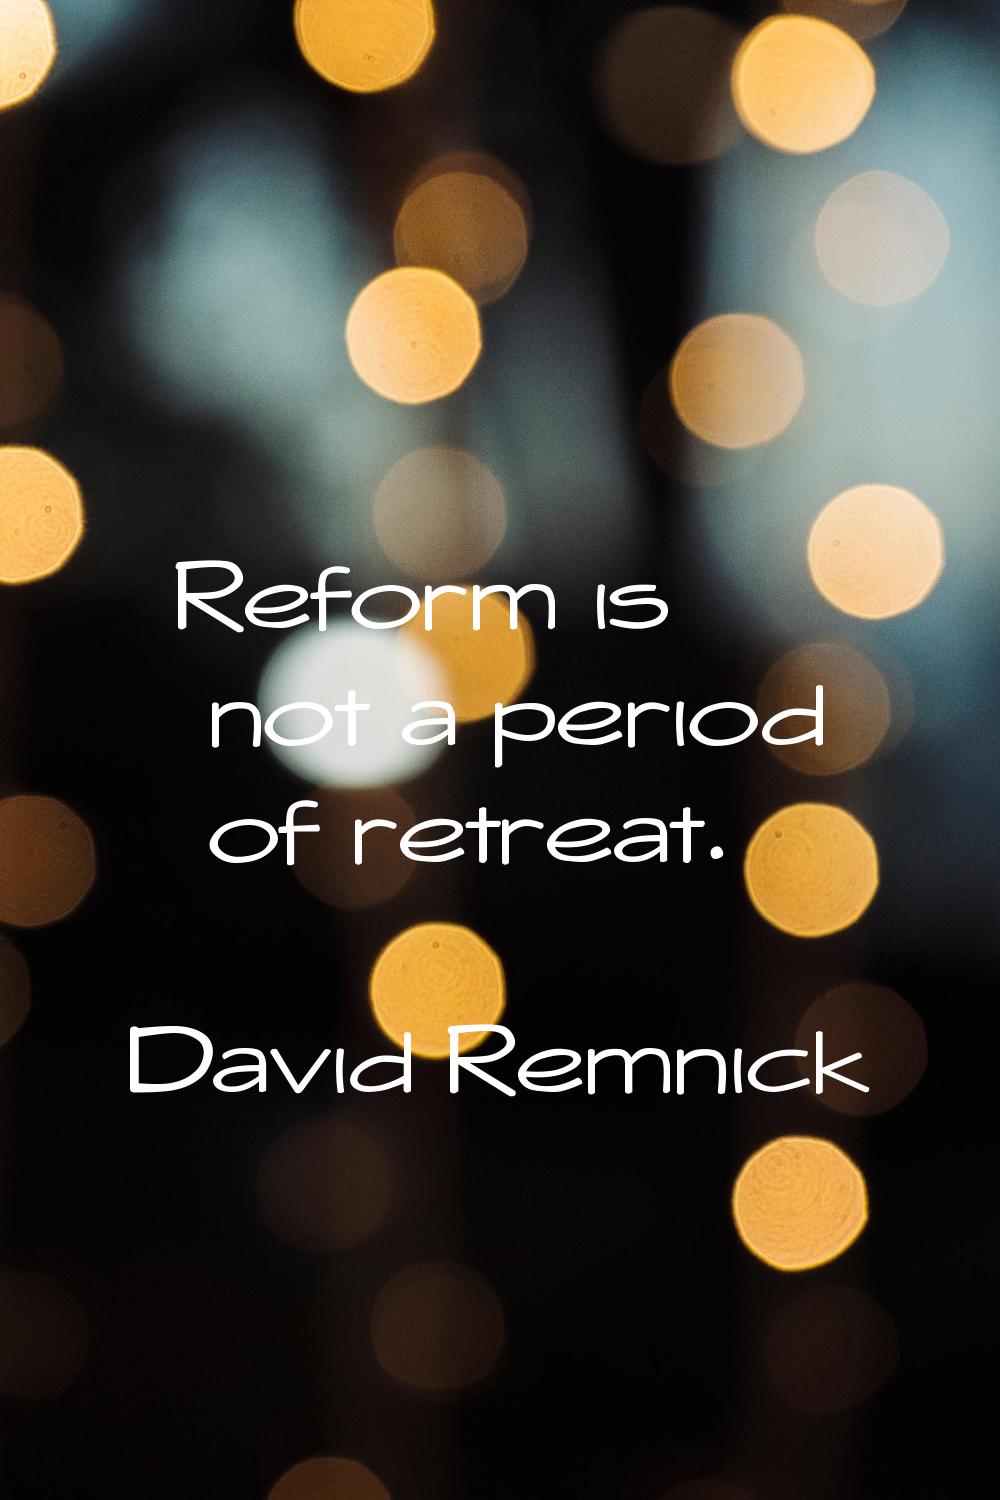 Reform is not a period of retreat.